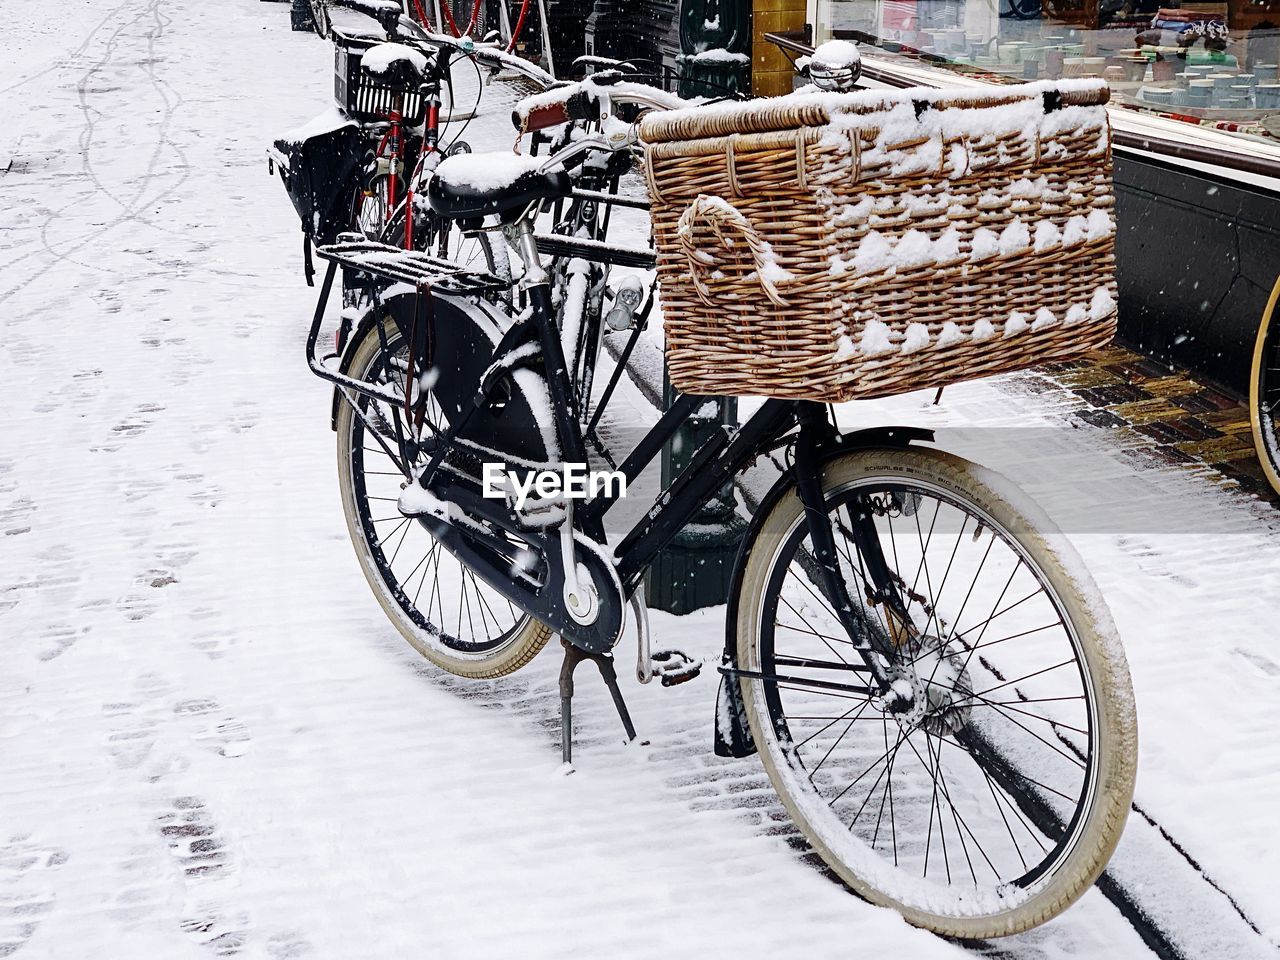 Bicycle parked on snowy road